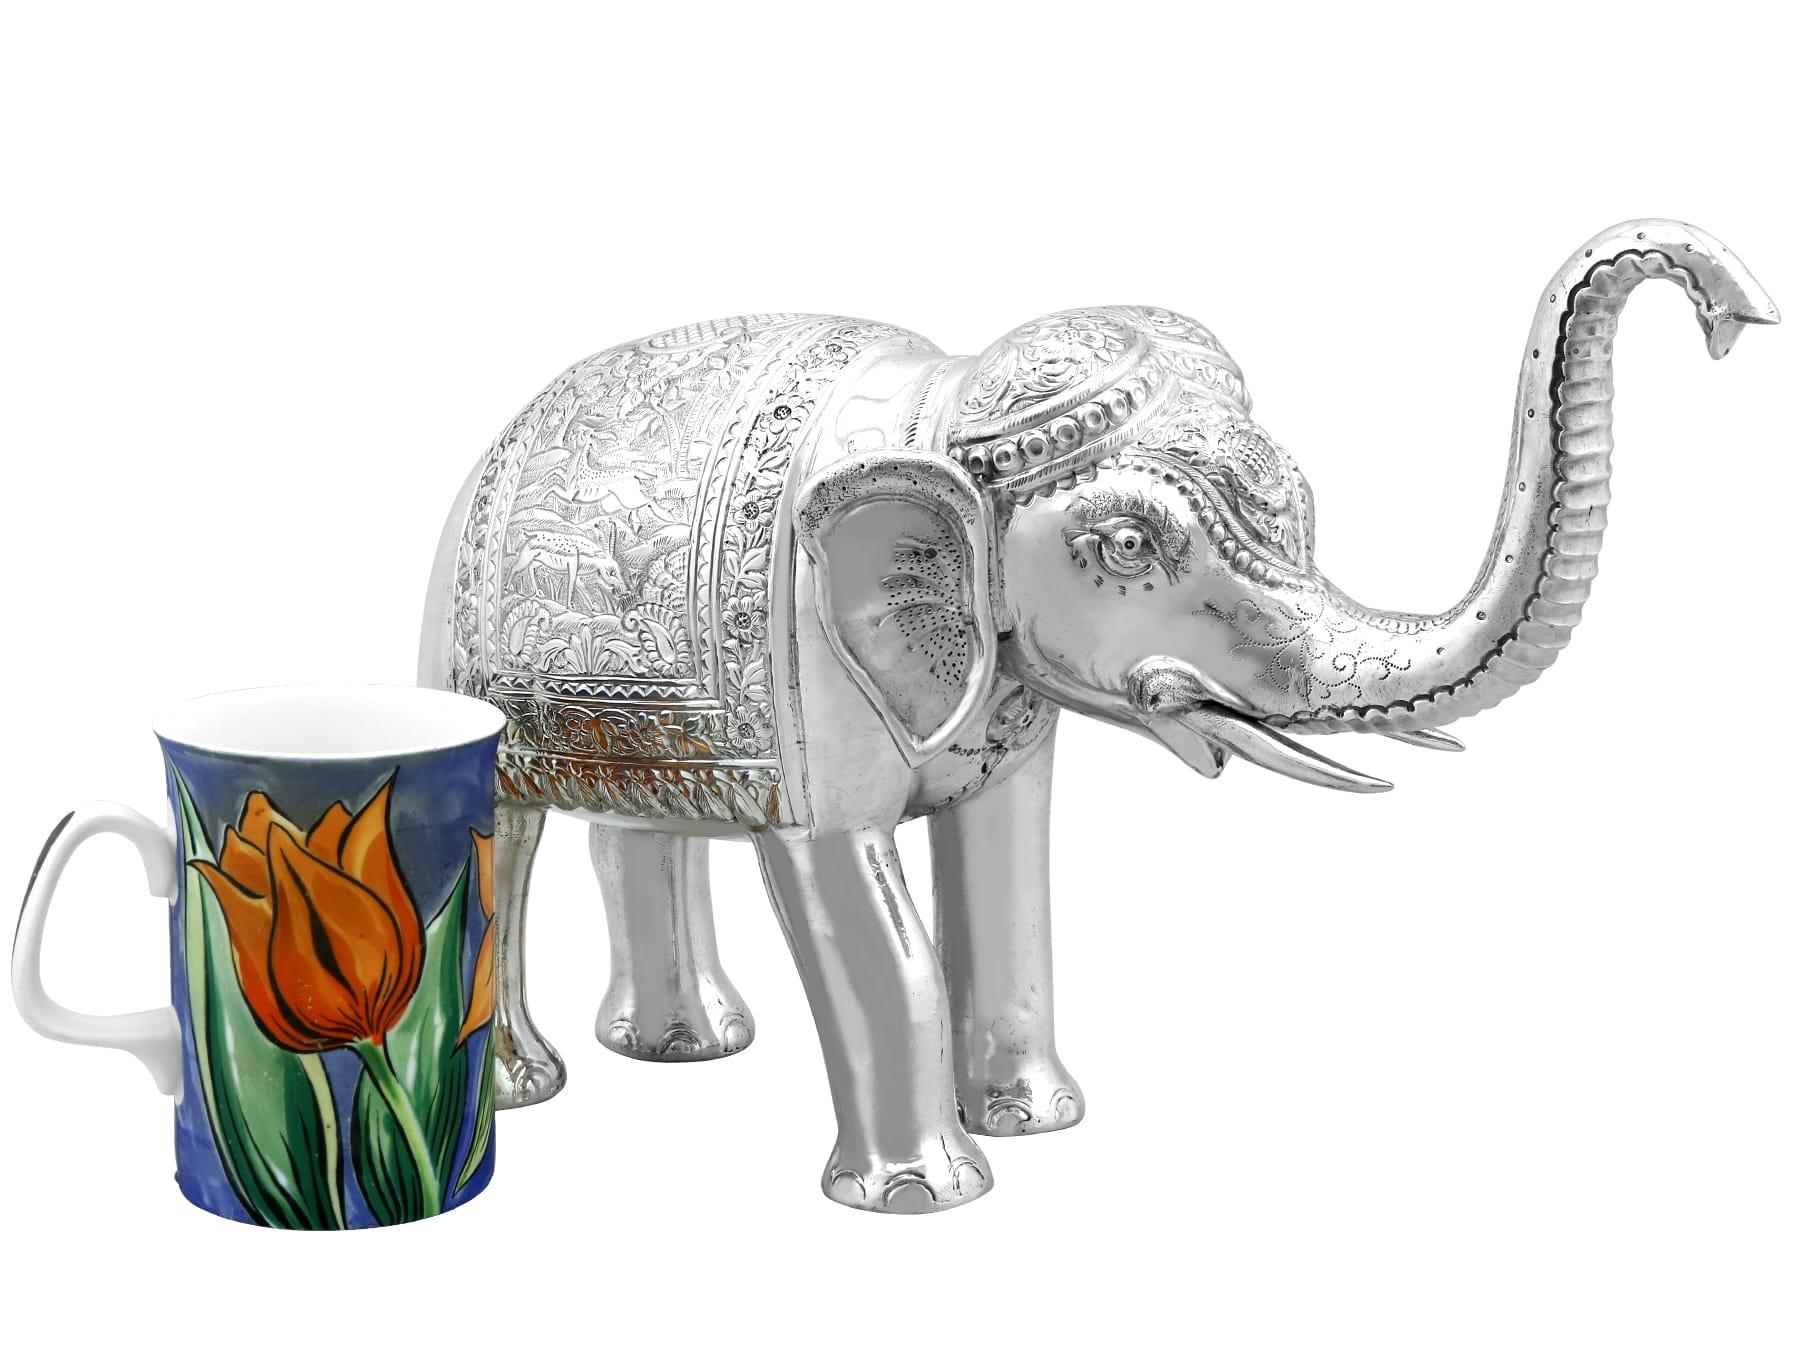 An exceptional, fine and impressive vintage Indian silver table ornament of an elephant; part of our ornamental silverware collection

This exceptional vintage Indian silver ornament has been realistically modelled in the form of an